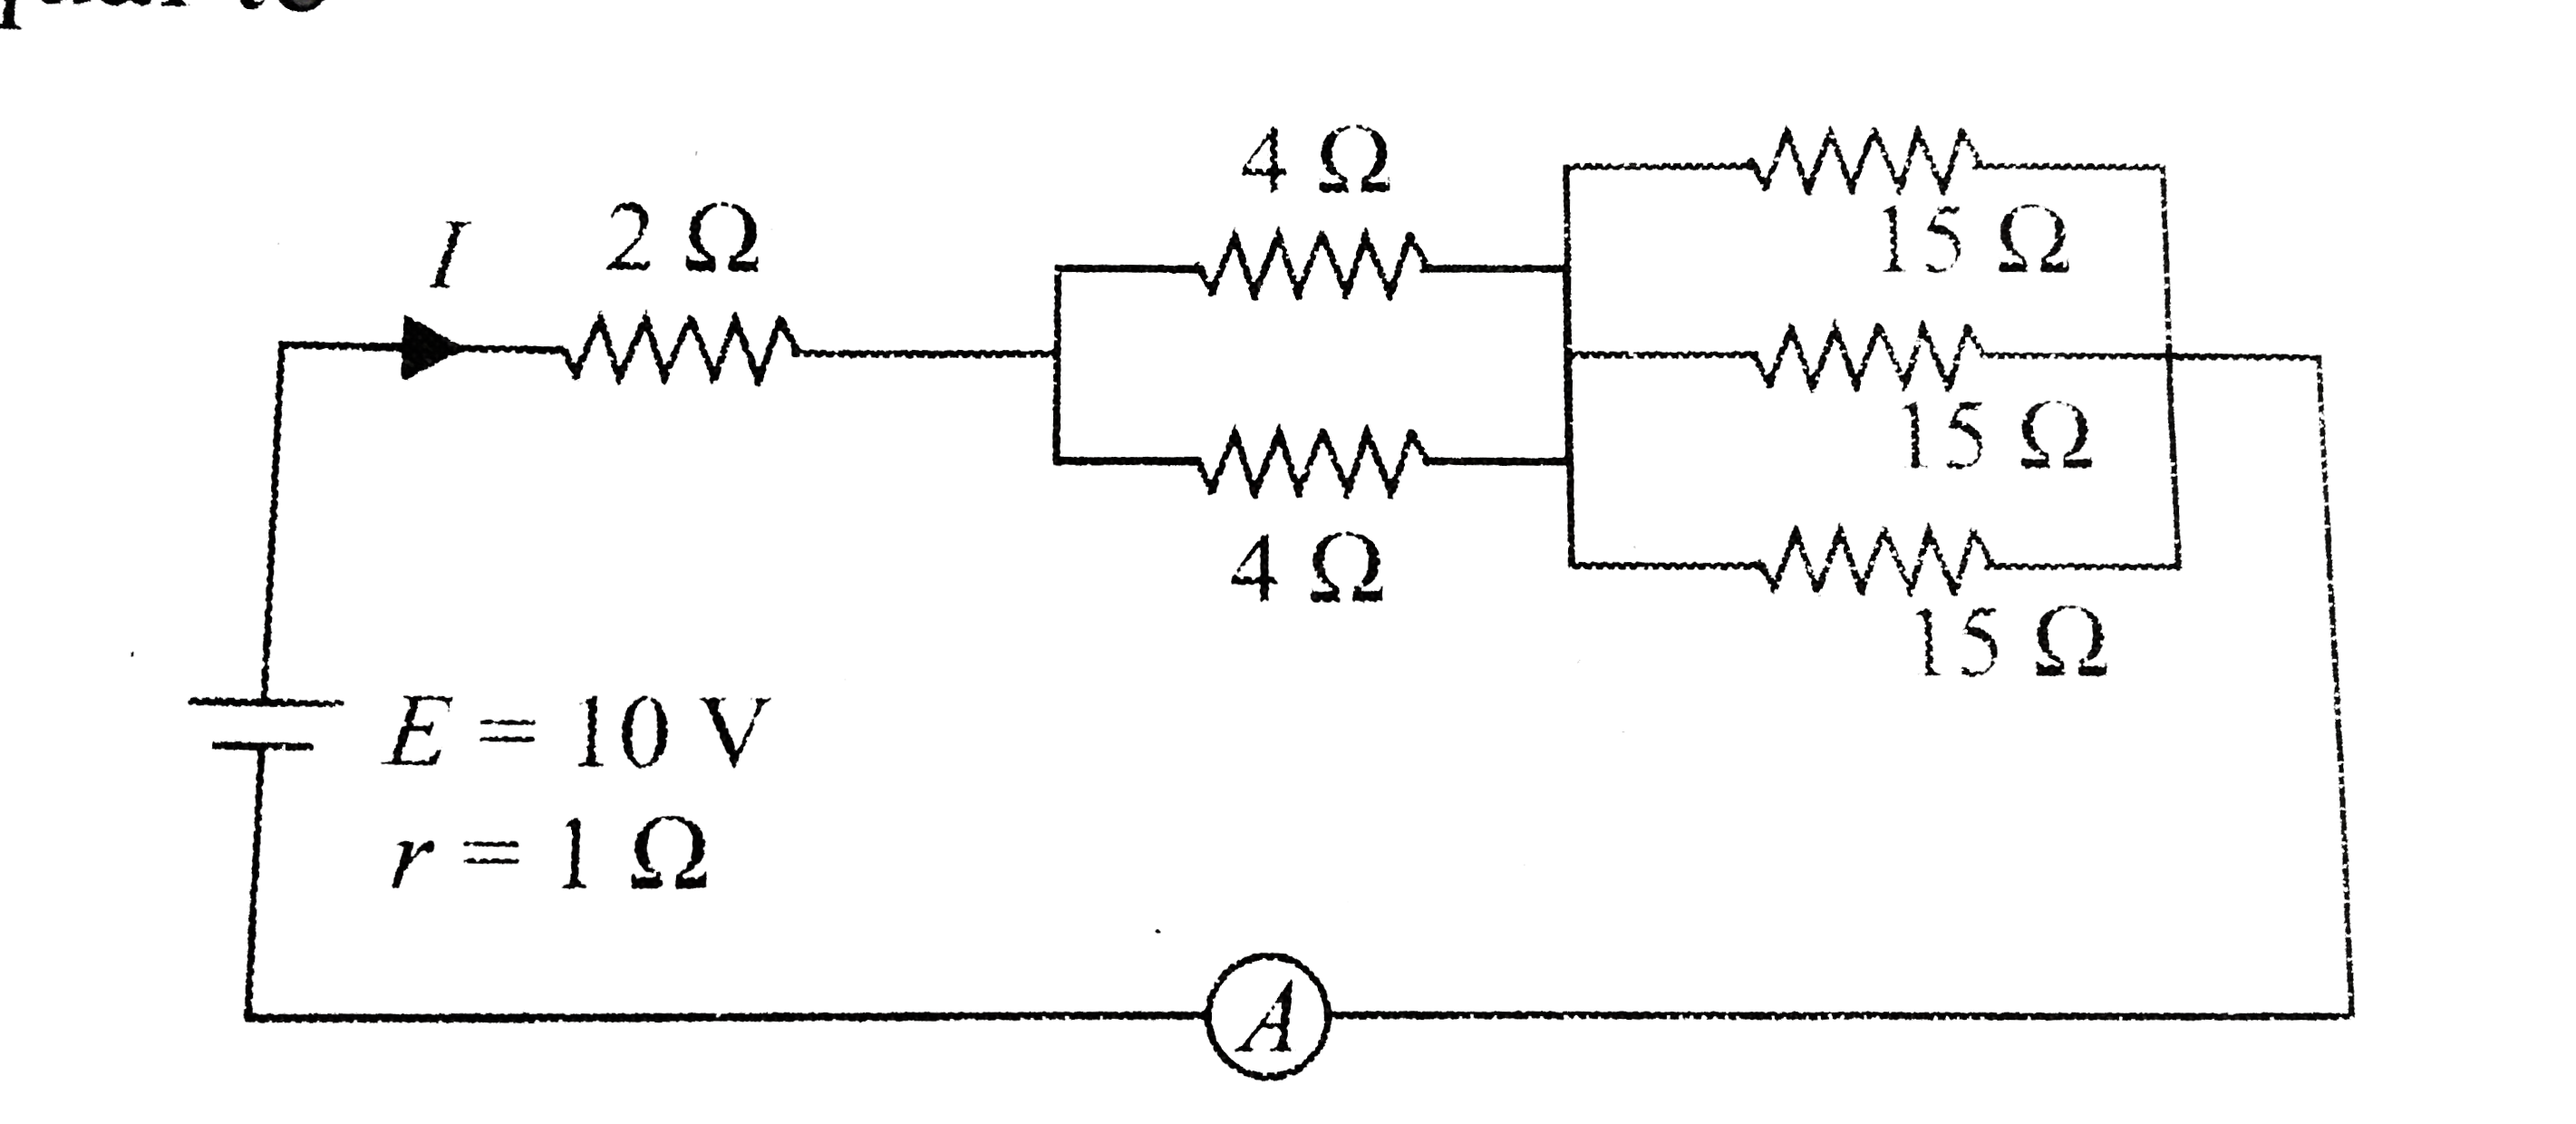 In the circuit shown in fig. the current I has  a value equal to